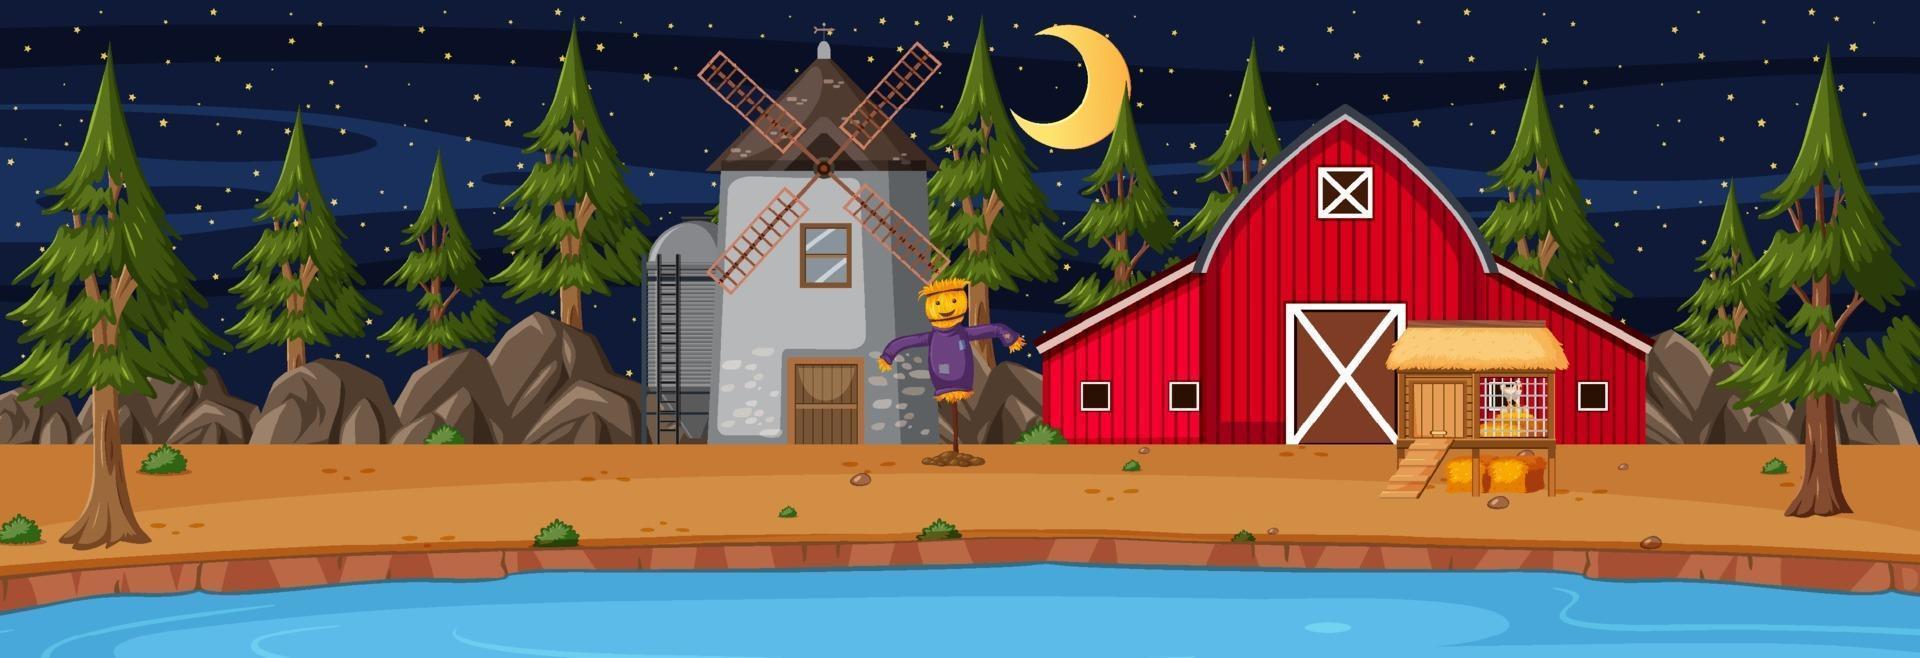 Farmland horizontal scene with barn and windmill at night time vector